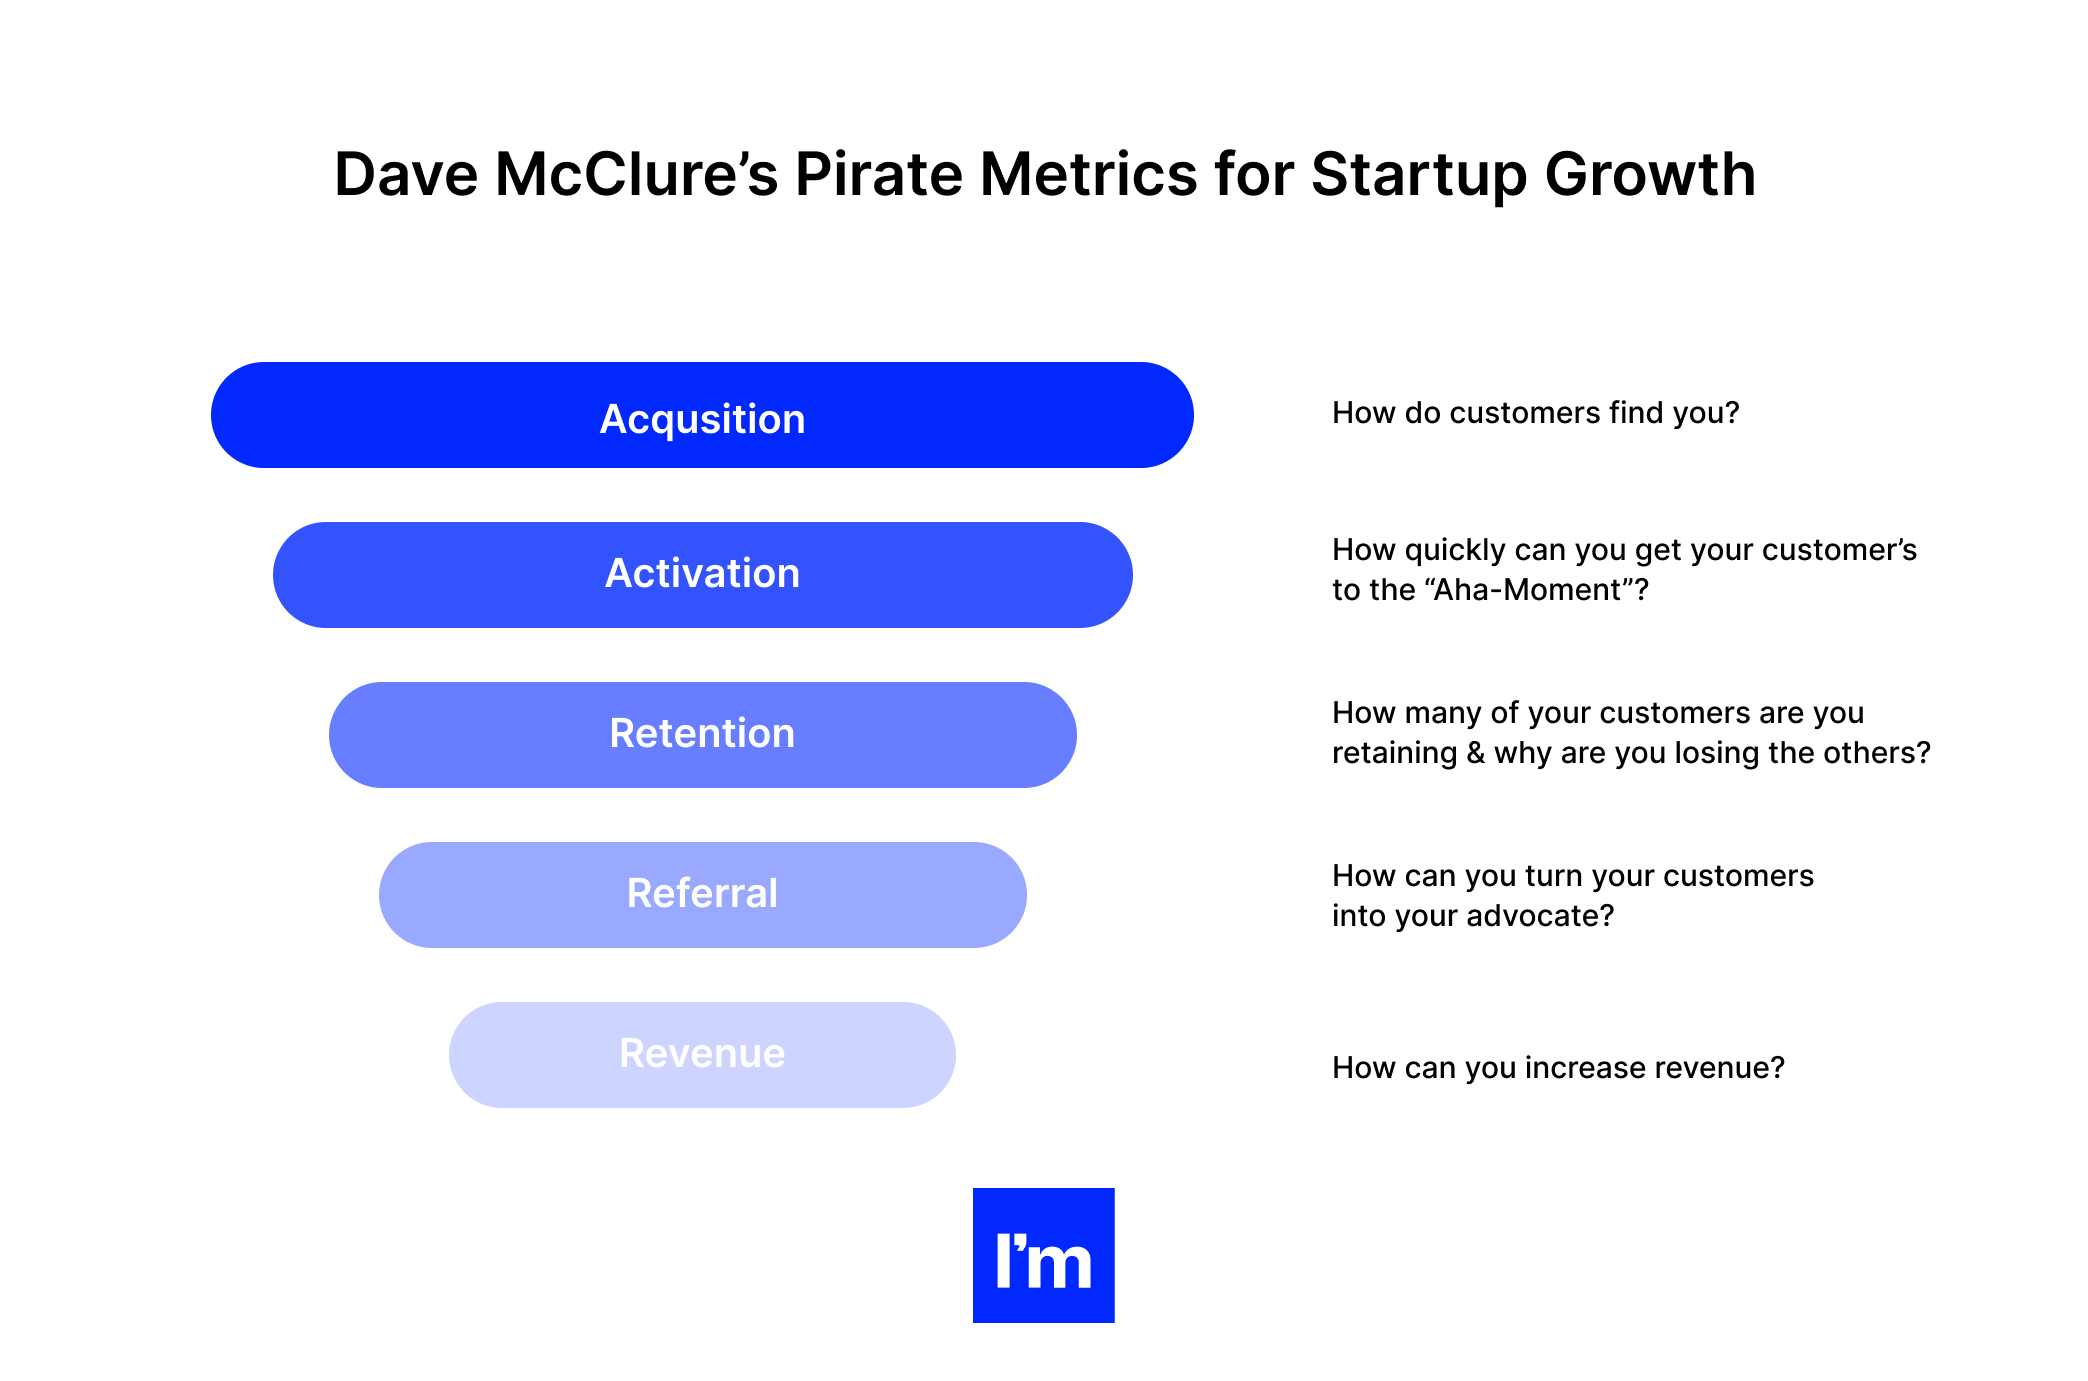 Setting Product Performance Metrics in Web SaaS Product_ Guidelines and Frameworks -  Dave McClures pirate metrics